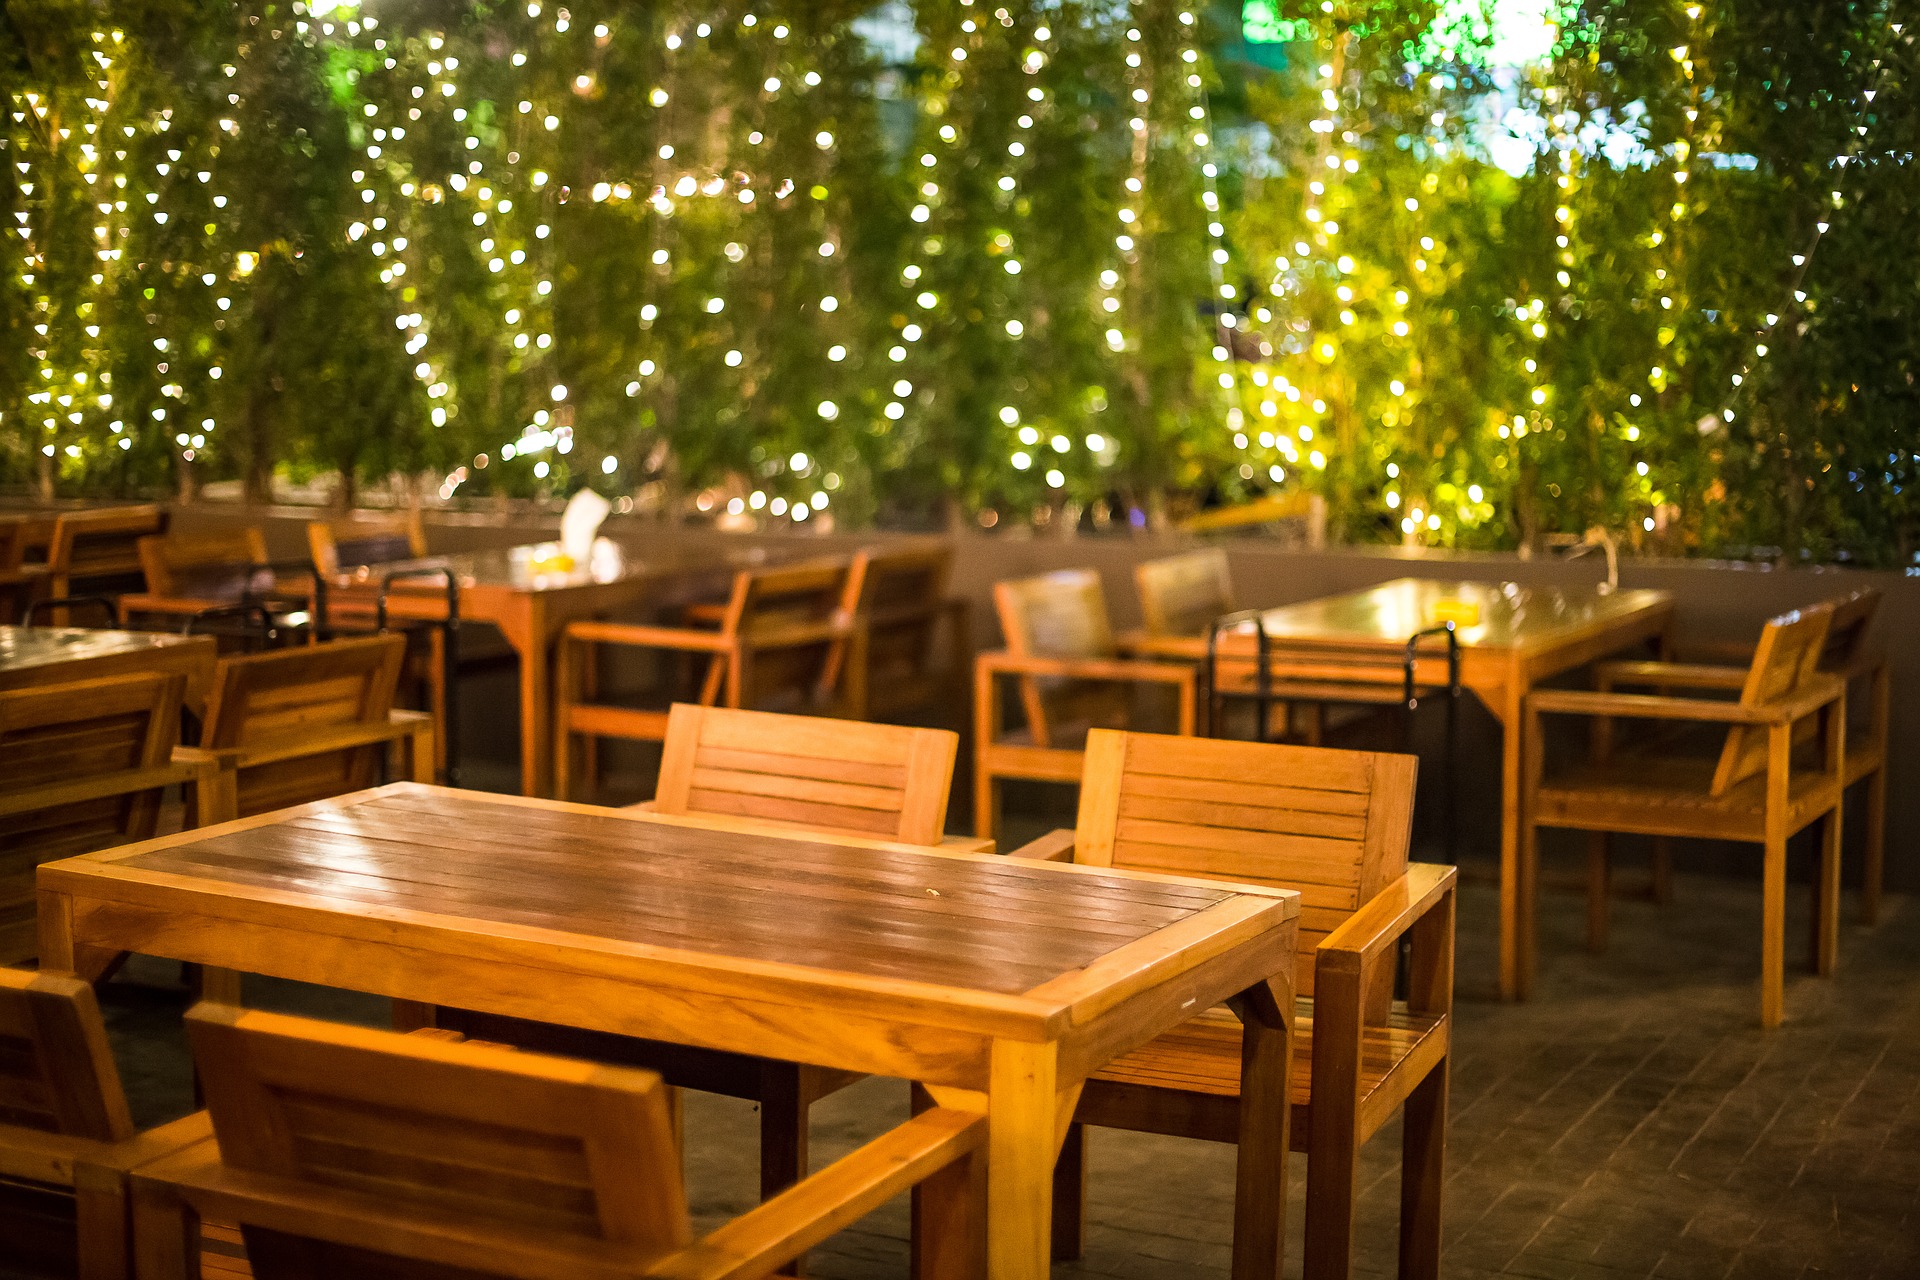 Mosquito Joe of Gold Coast CT offers outdoor pest control services for businesses such as restaurants with outdoor areas. This allows customers to enjoy their meal without becoming the meal!